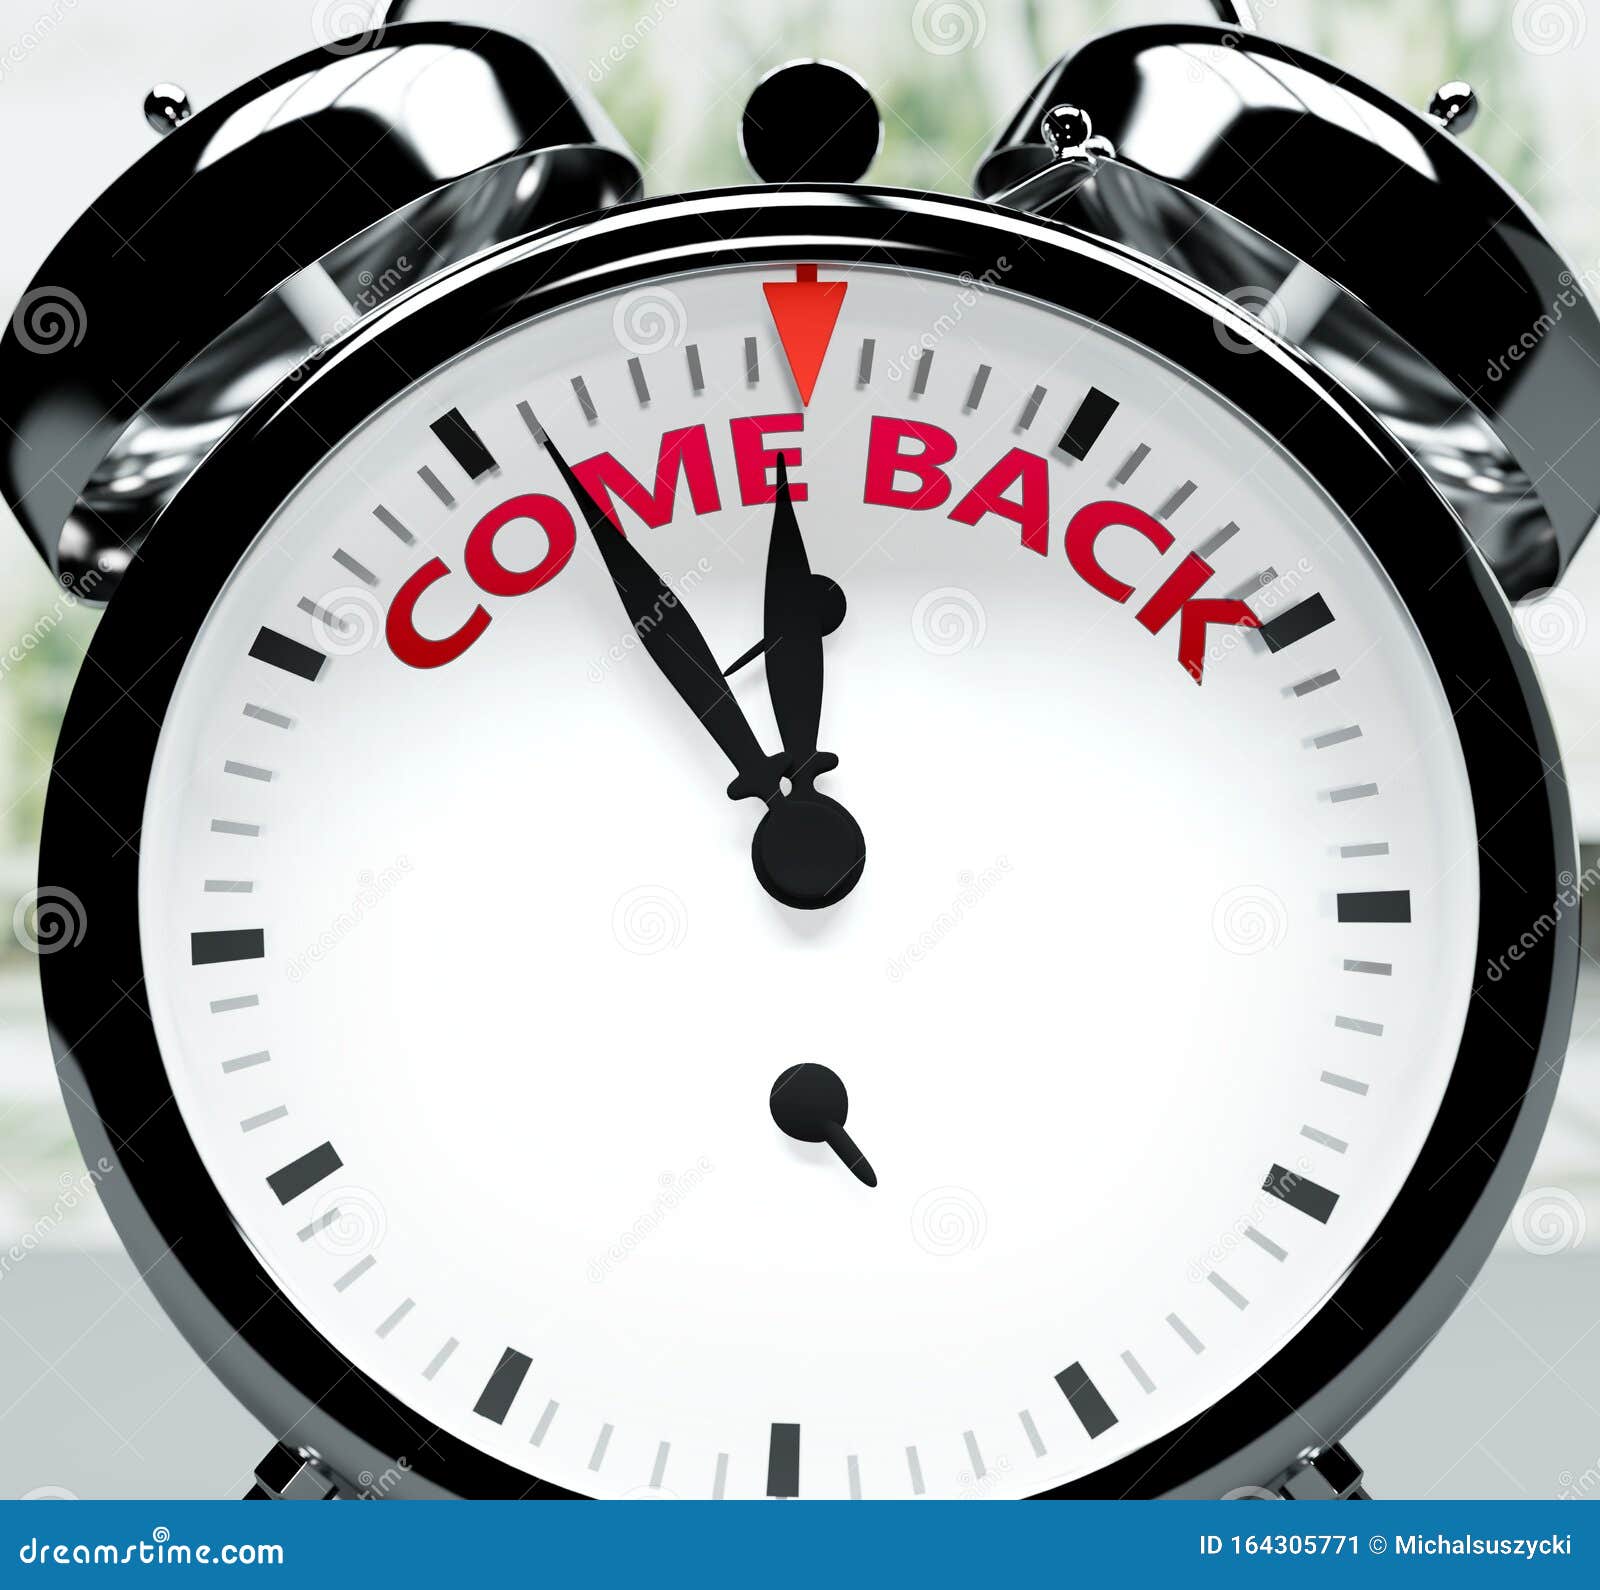 come back soon, almost there, in short time - a clock izes a reminder that come back is near, will happen and finish quickly